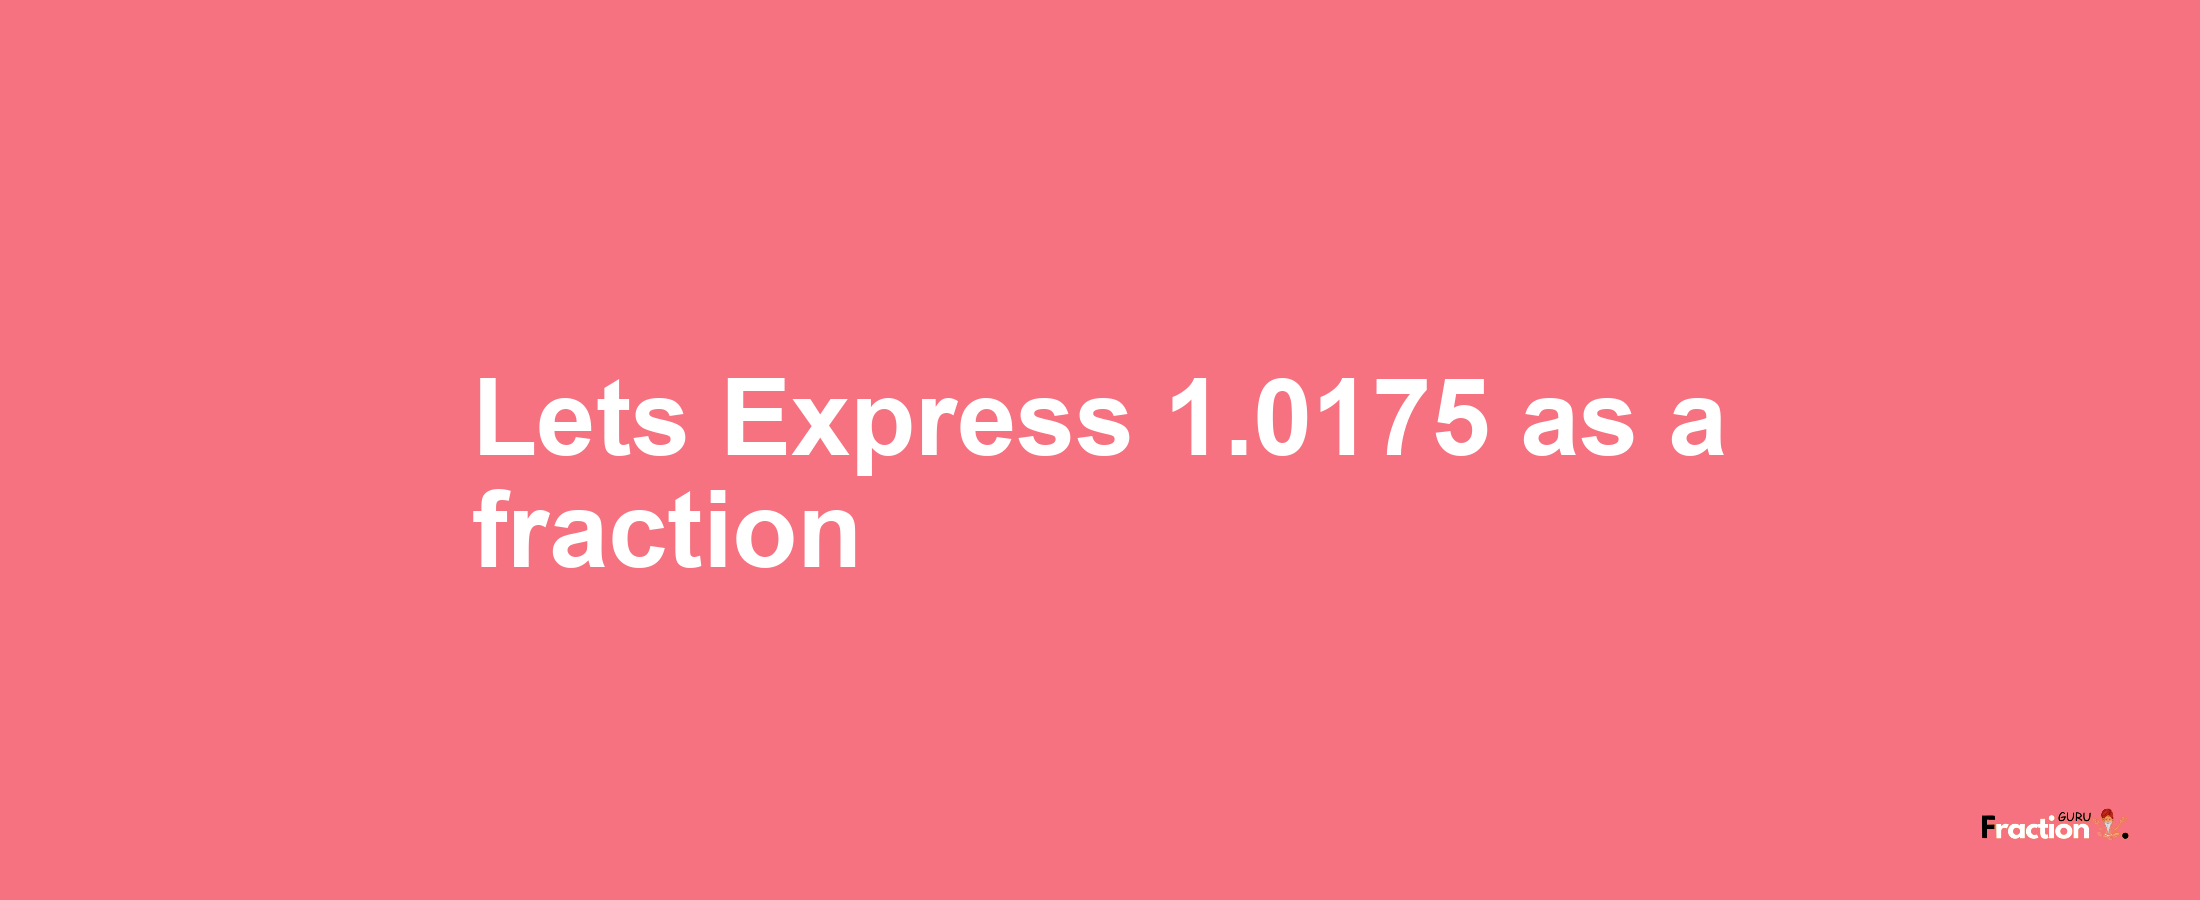 Lets Express 1.0175 as afraction